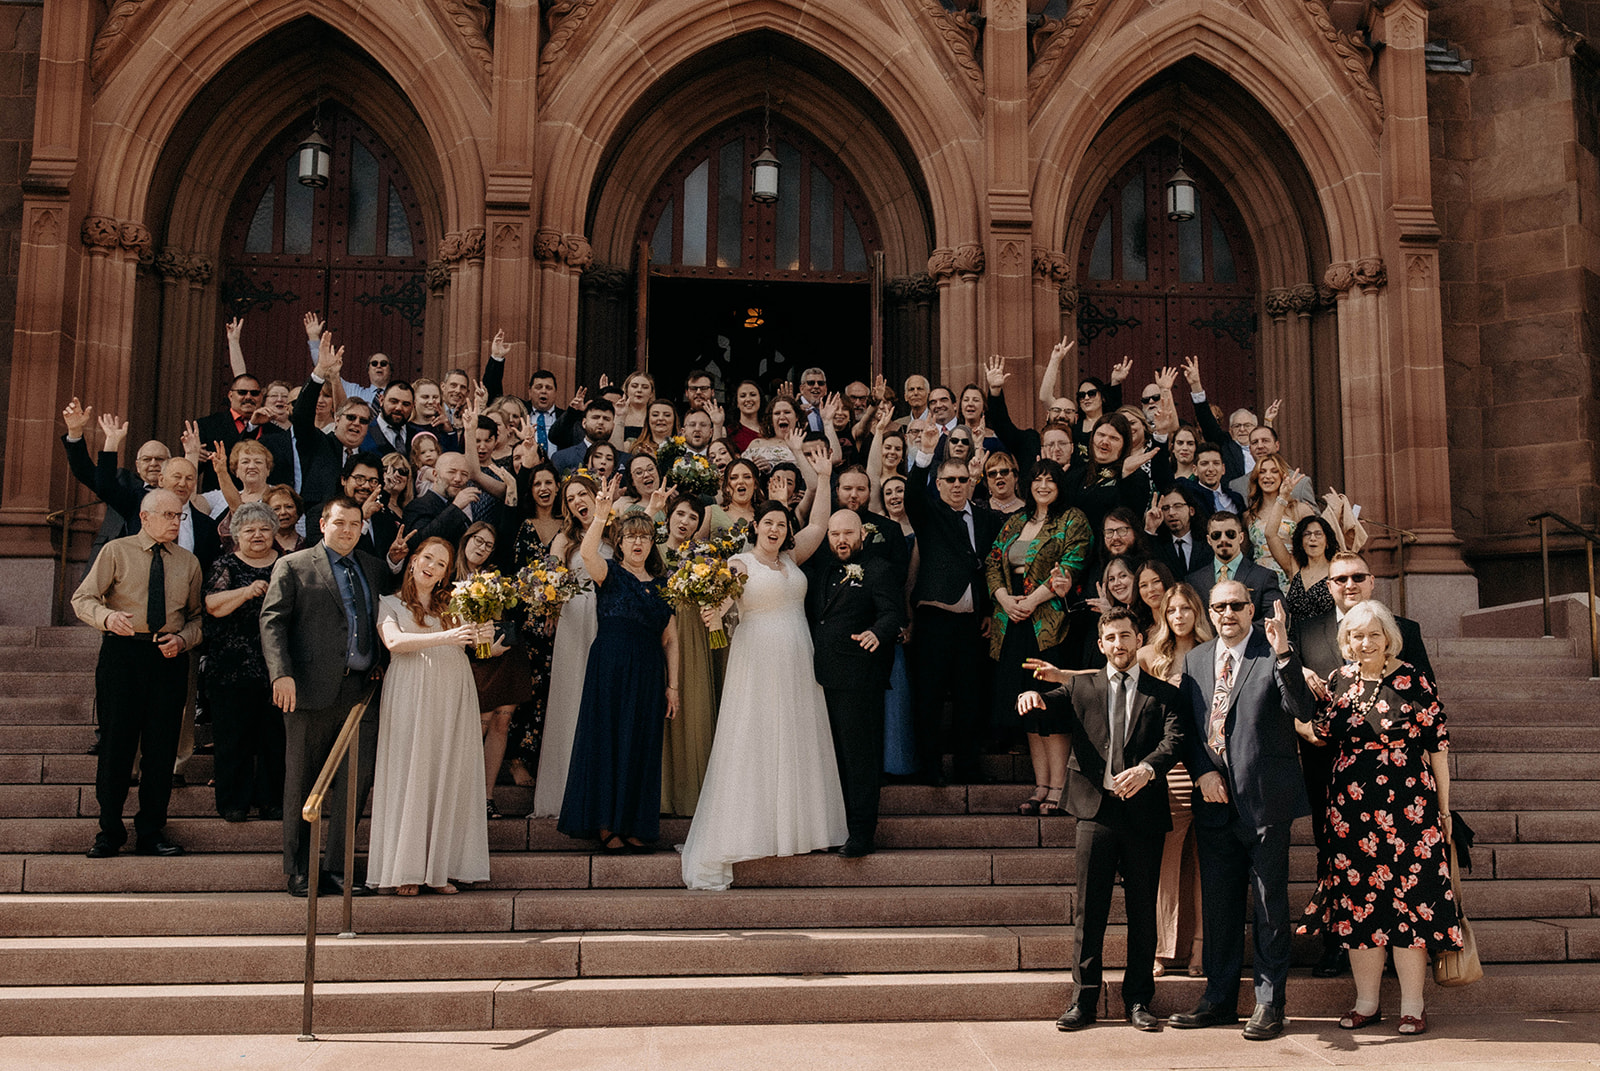 The wedding party groups together to pose together on the upstate New York wedding venue